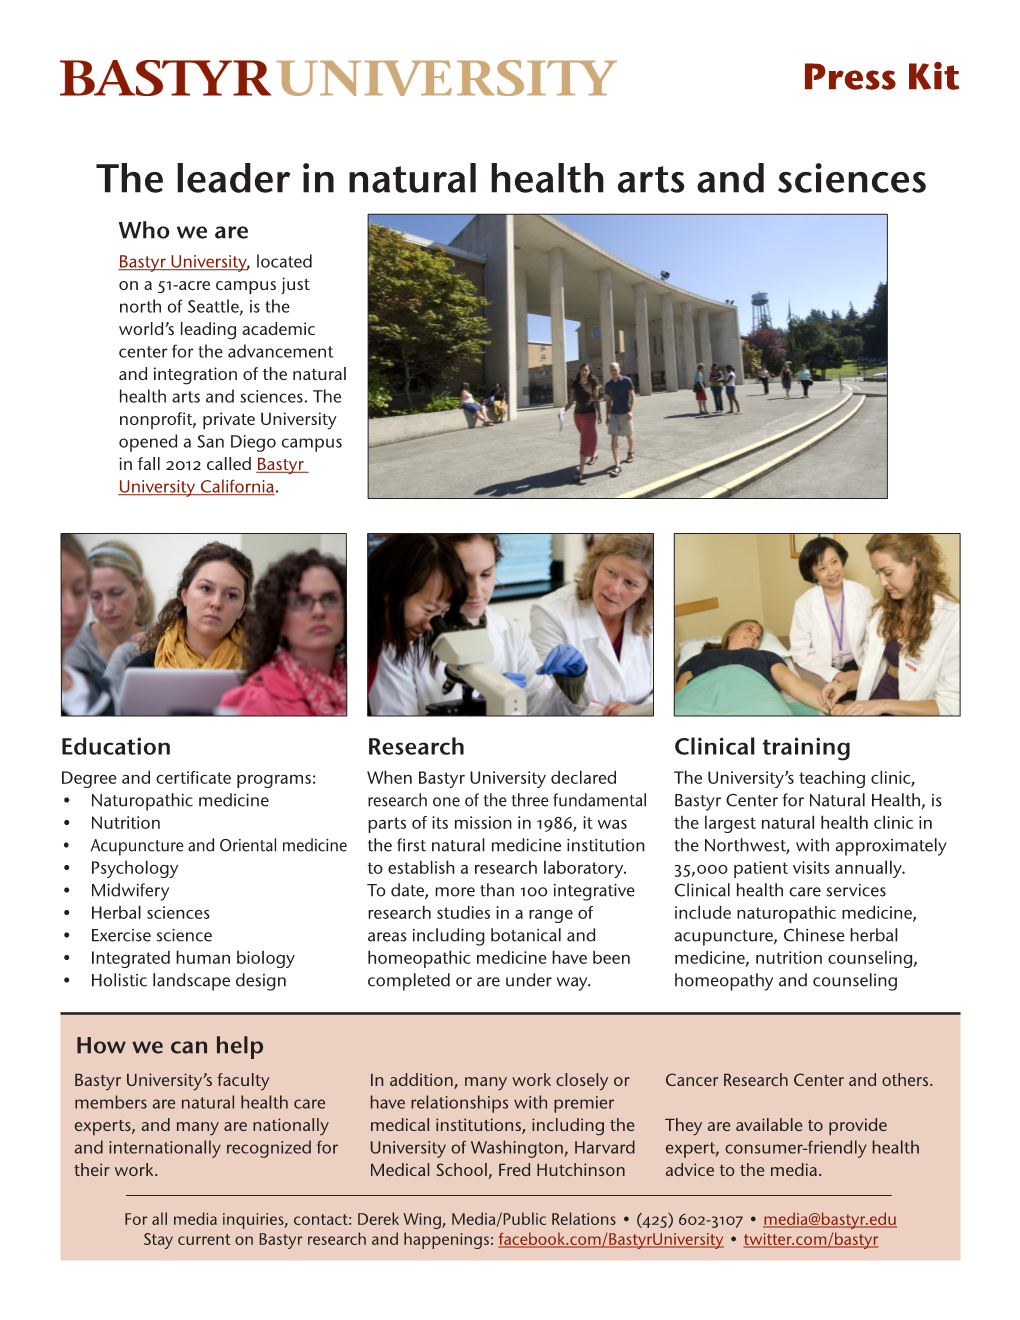 The Leader in Natural Health Arts and Sciences